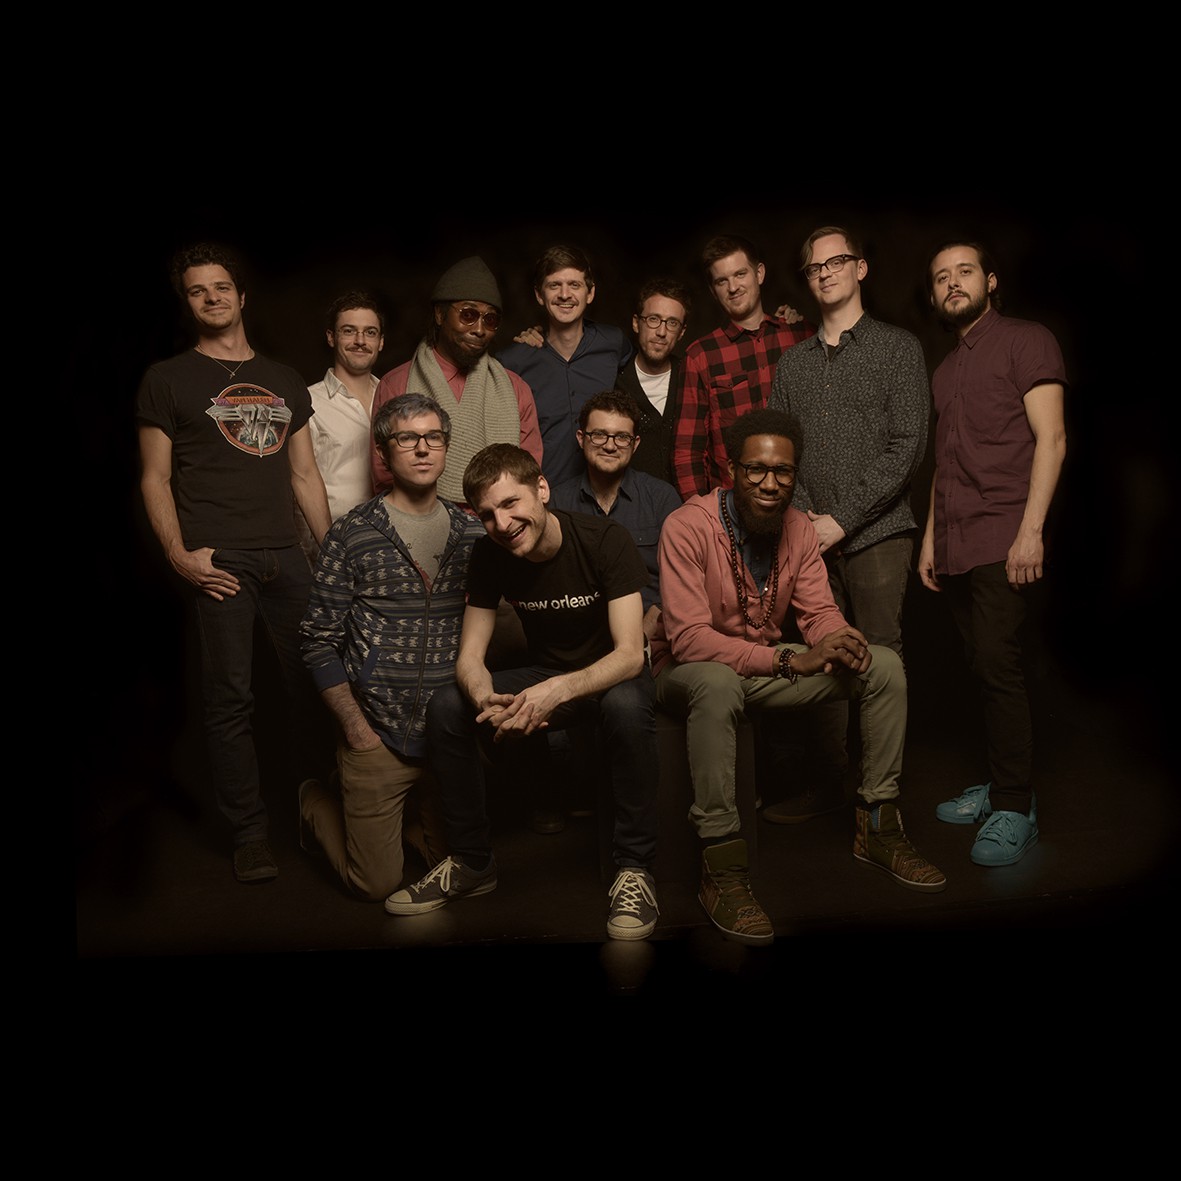 1833-V6C-Snarky-Puppy-2015-Copyright-Philippe-LEVY-STAB-1181×1181-1